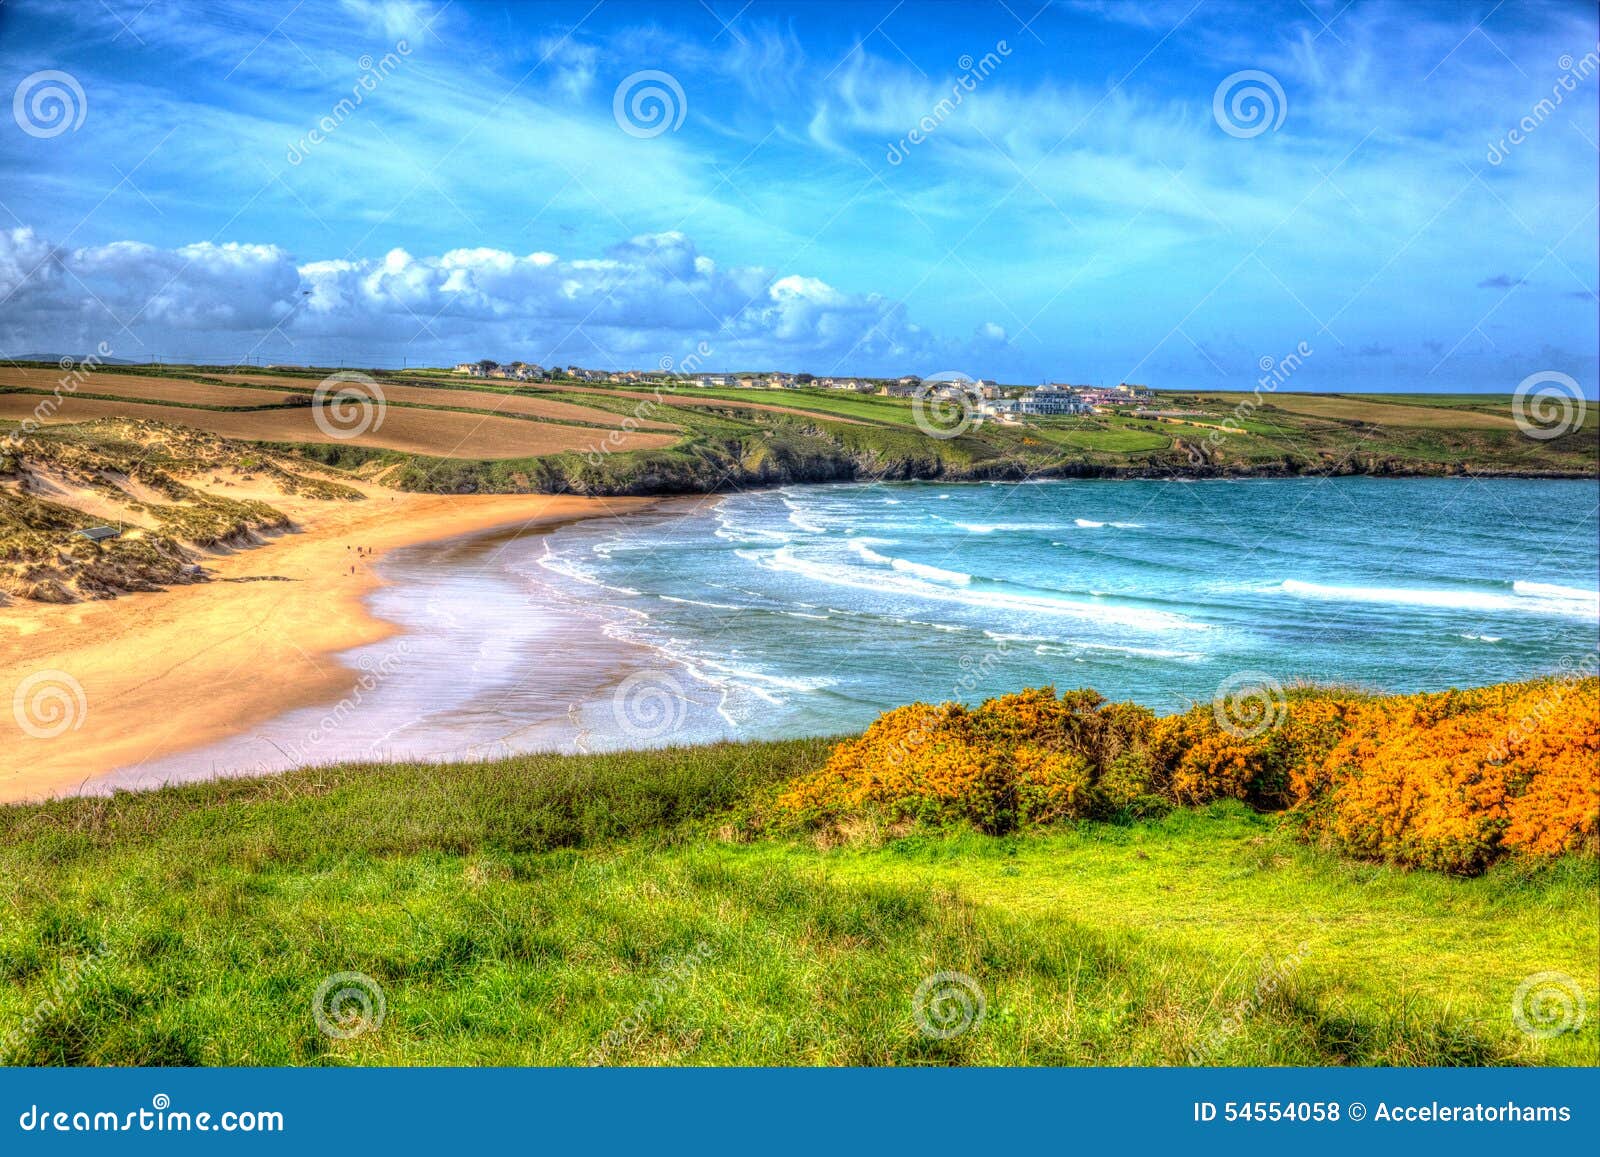 crantock beach north cornwall england uk near newquay in colourful hdr like a painting